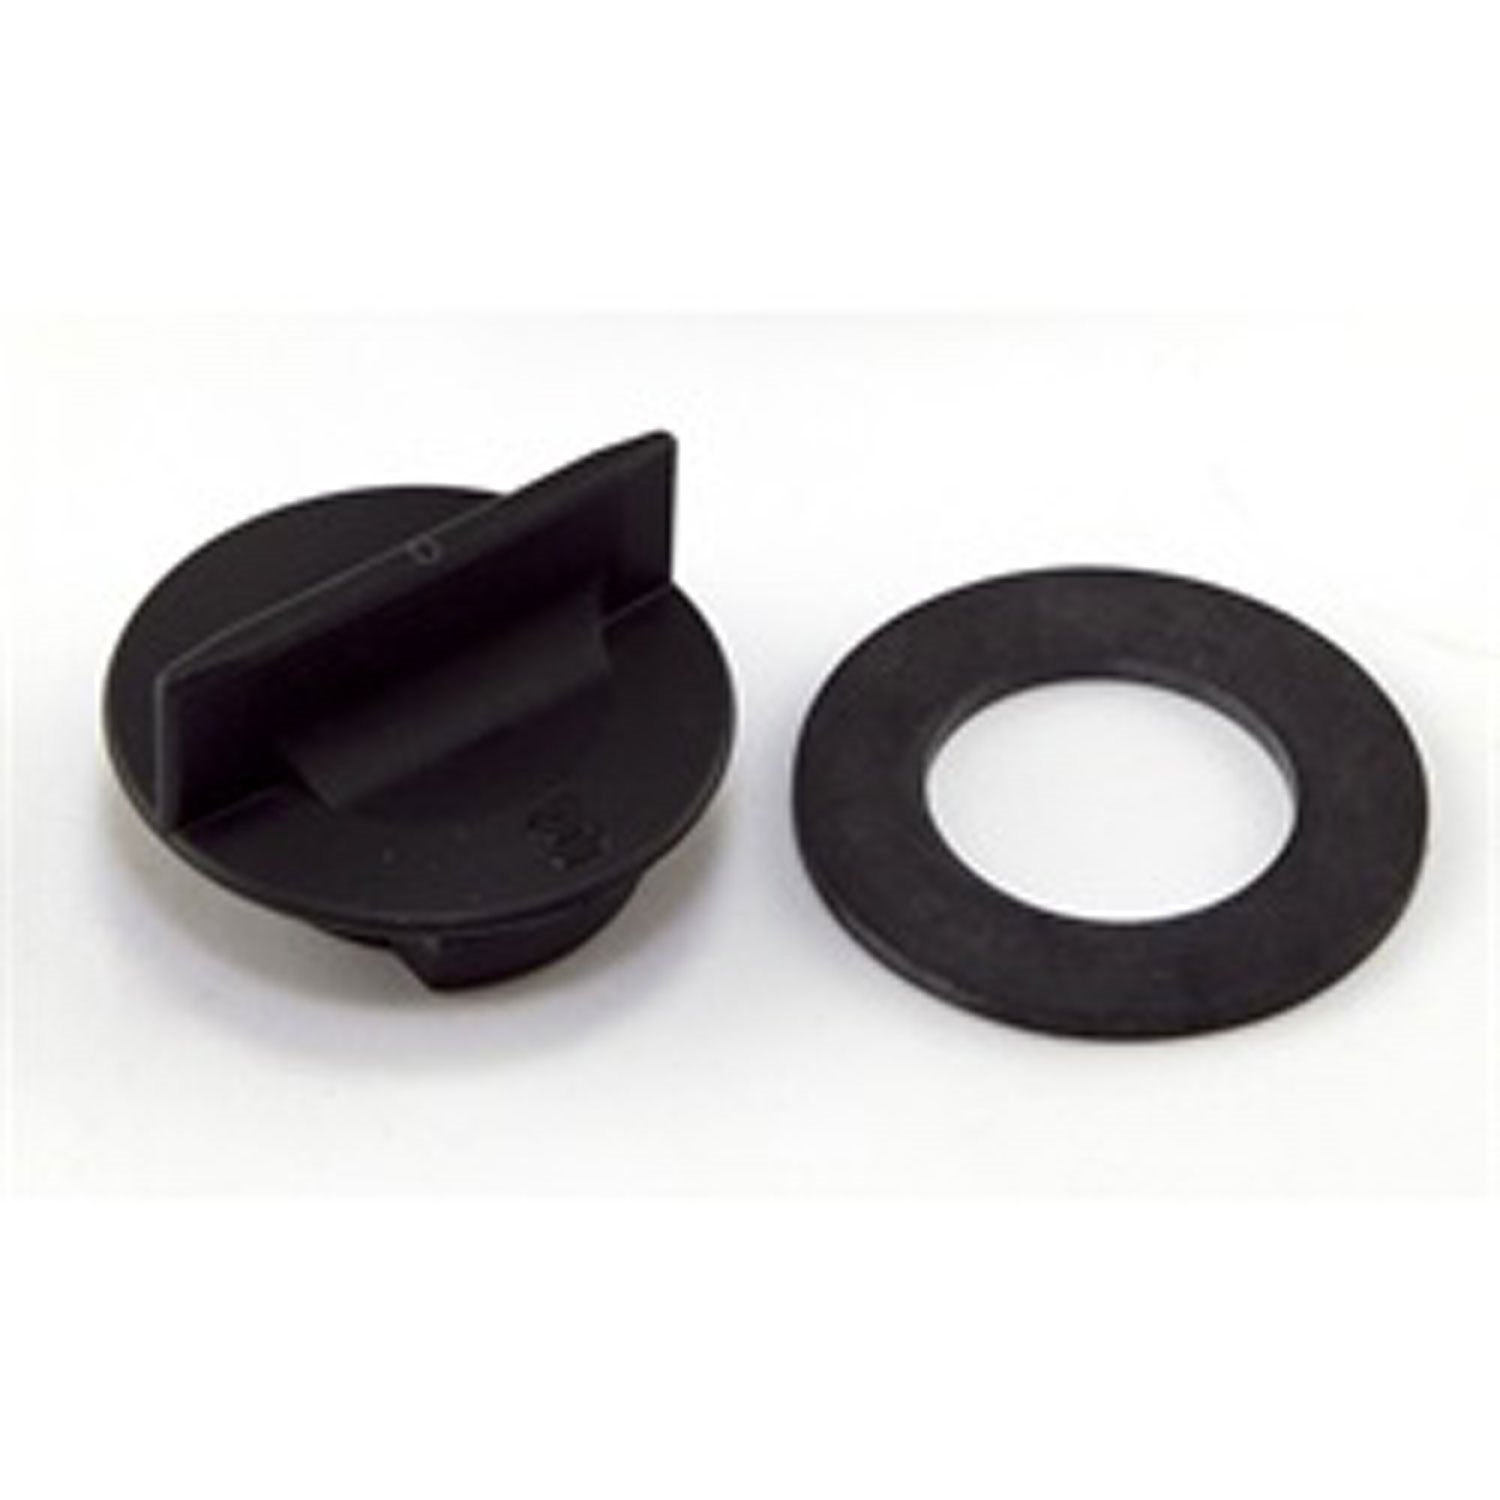 Oil Fill Cap for 1981-1990 Jeep Models with